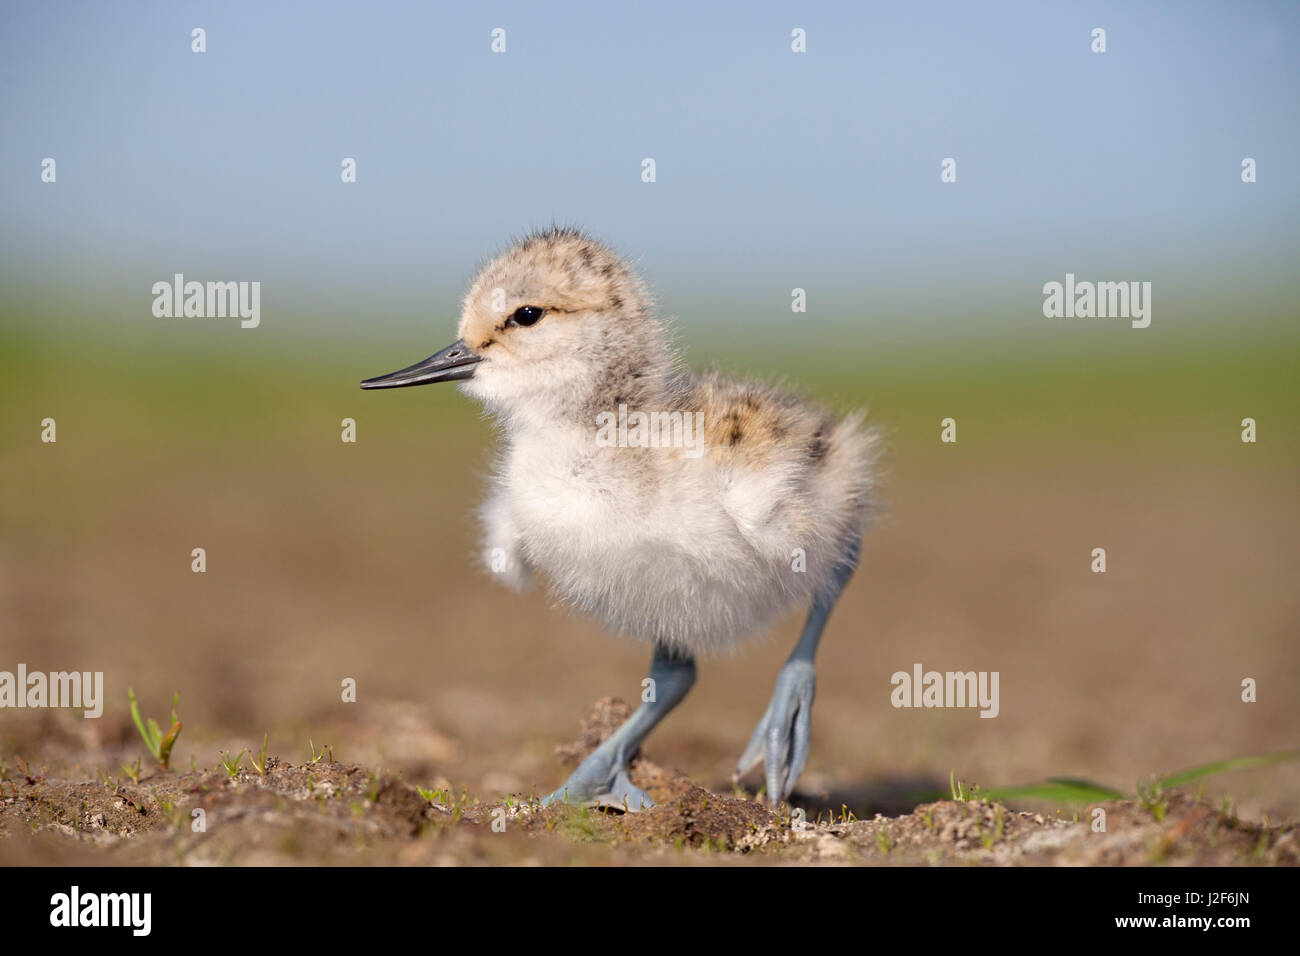 Photo of a young avocet chick on a dry shore Stock Photo